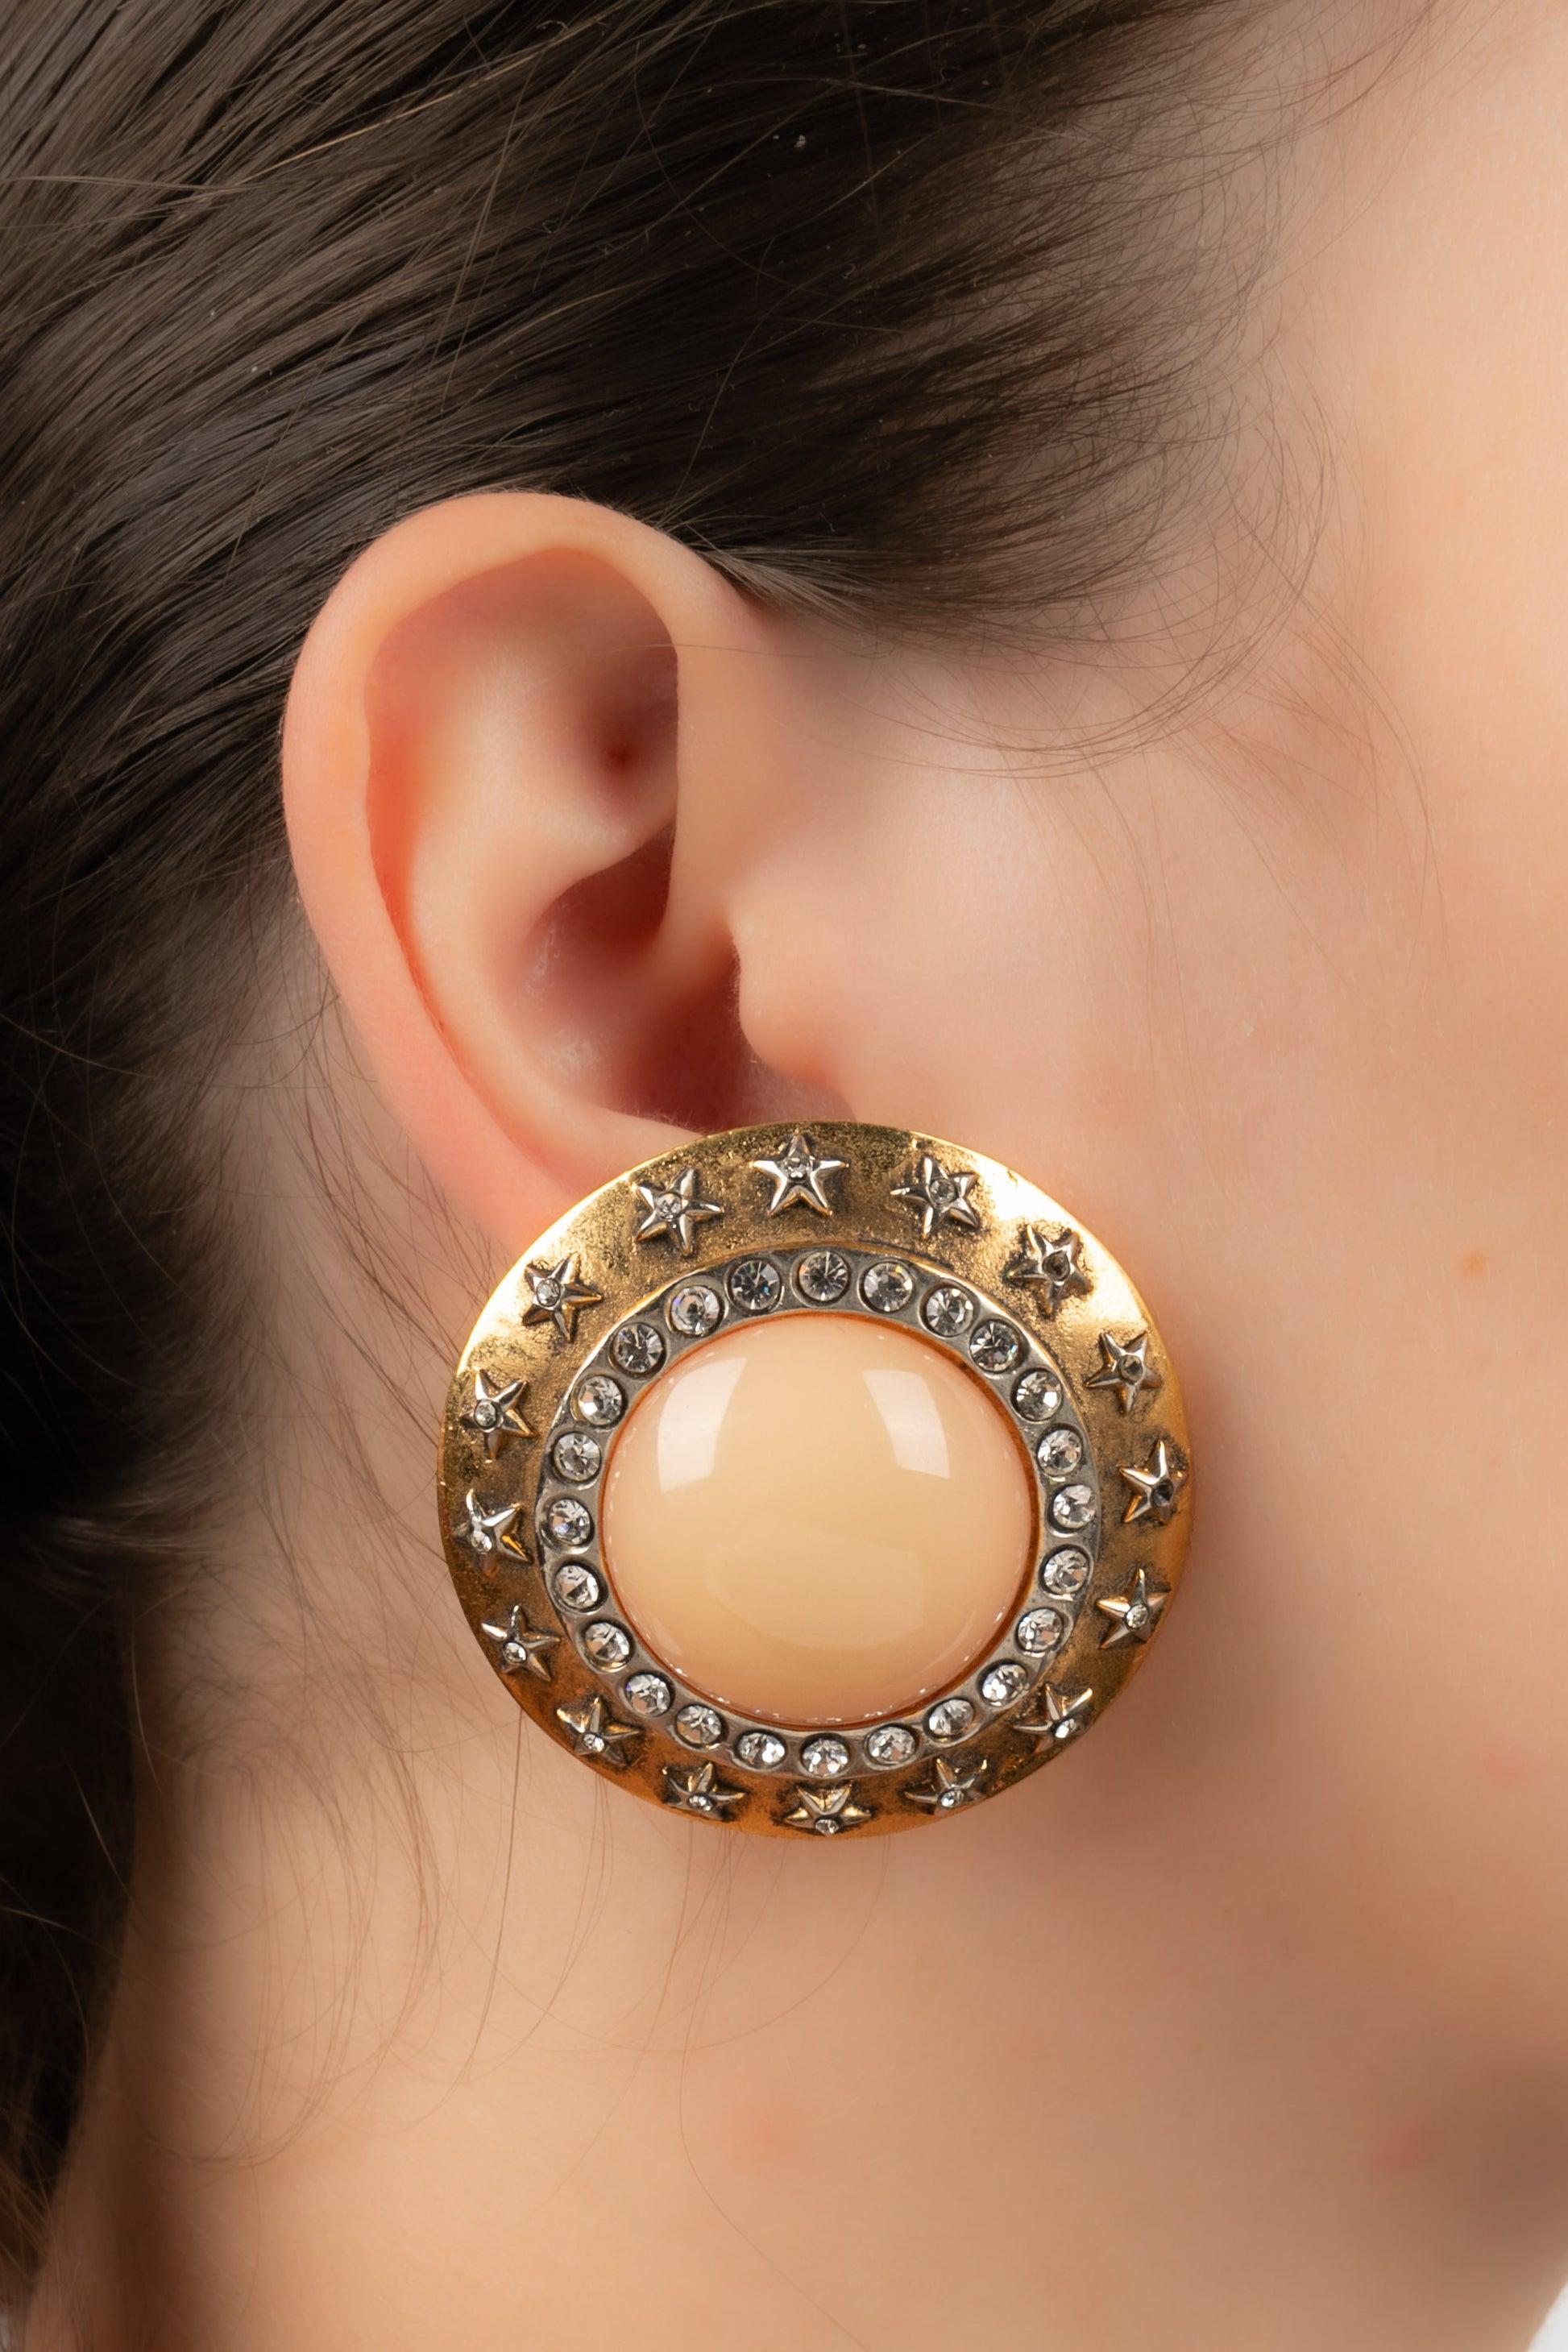 Chanel - Round clip-on earrings in golden metal and rhinestones. Central cabochon in glass paste.

Additional information:
Condition: Very good condition
Dimensions: Diameter: 4 cm

Seller Reference: BOB217